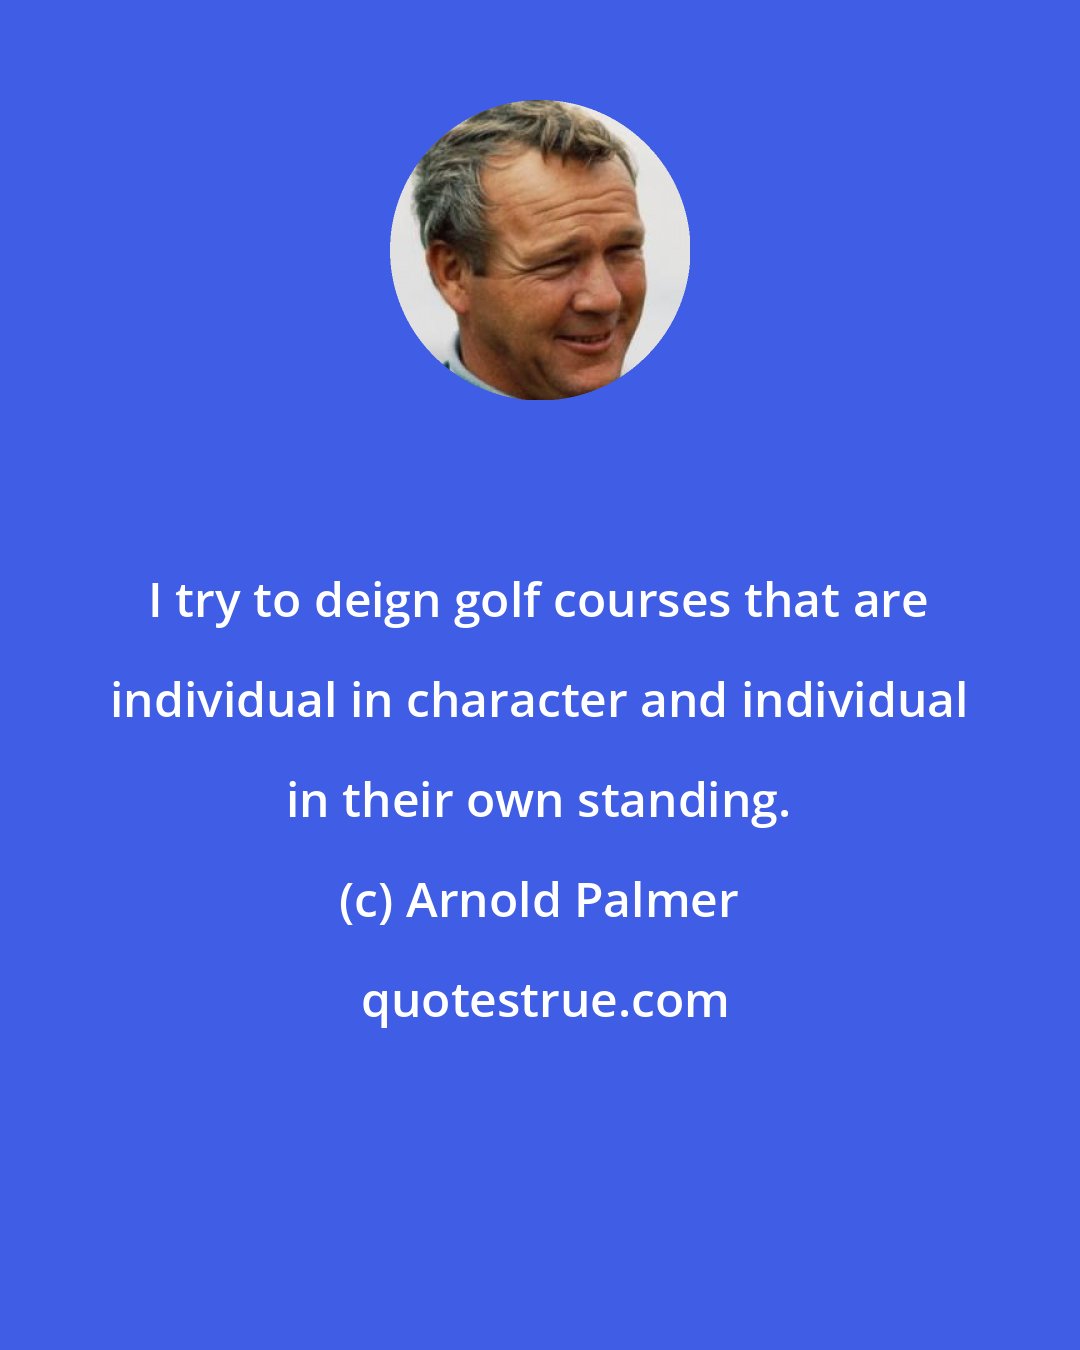 Arnold Palmer: I try to deign golf courses that are individual in character and individual in their own standing.